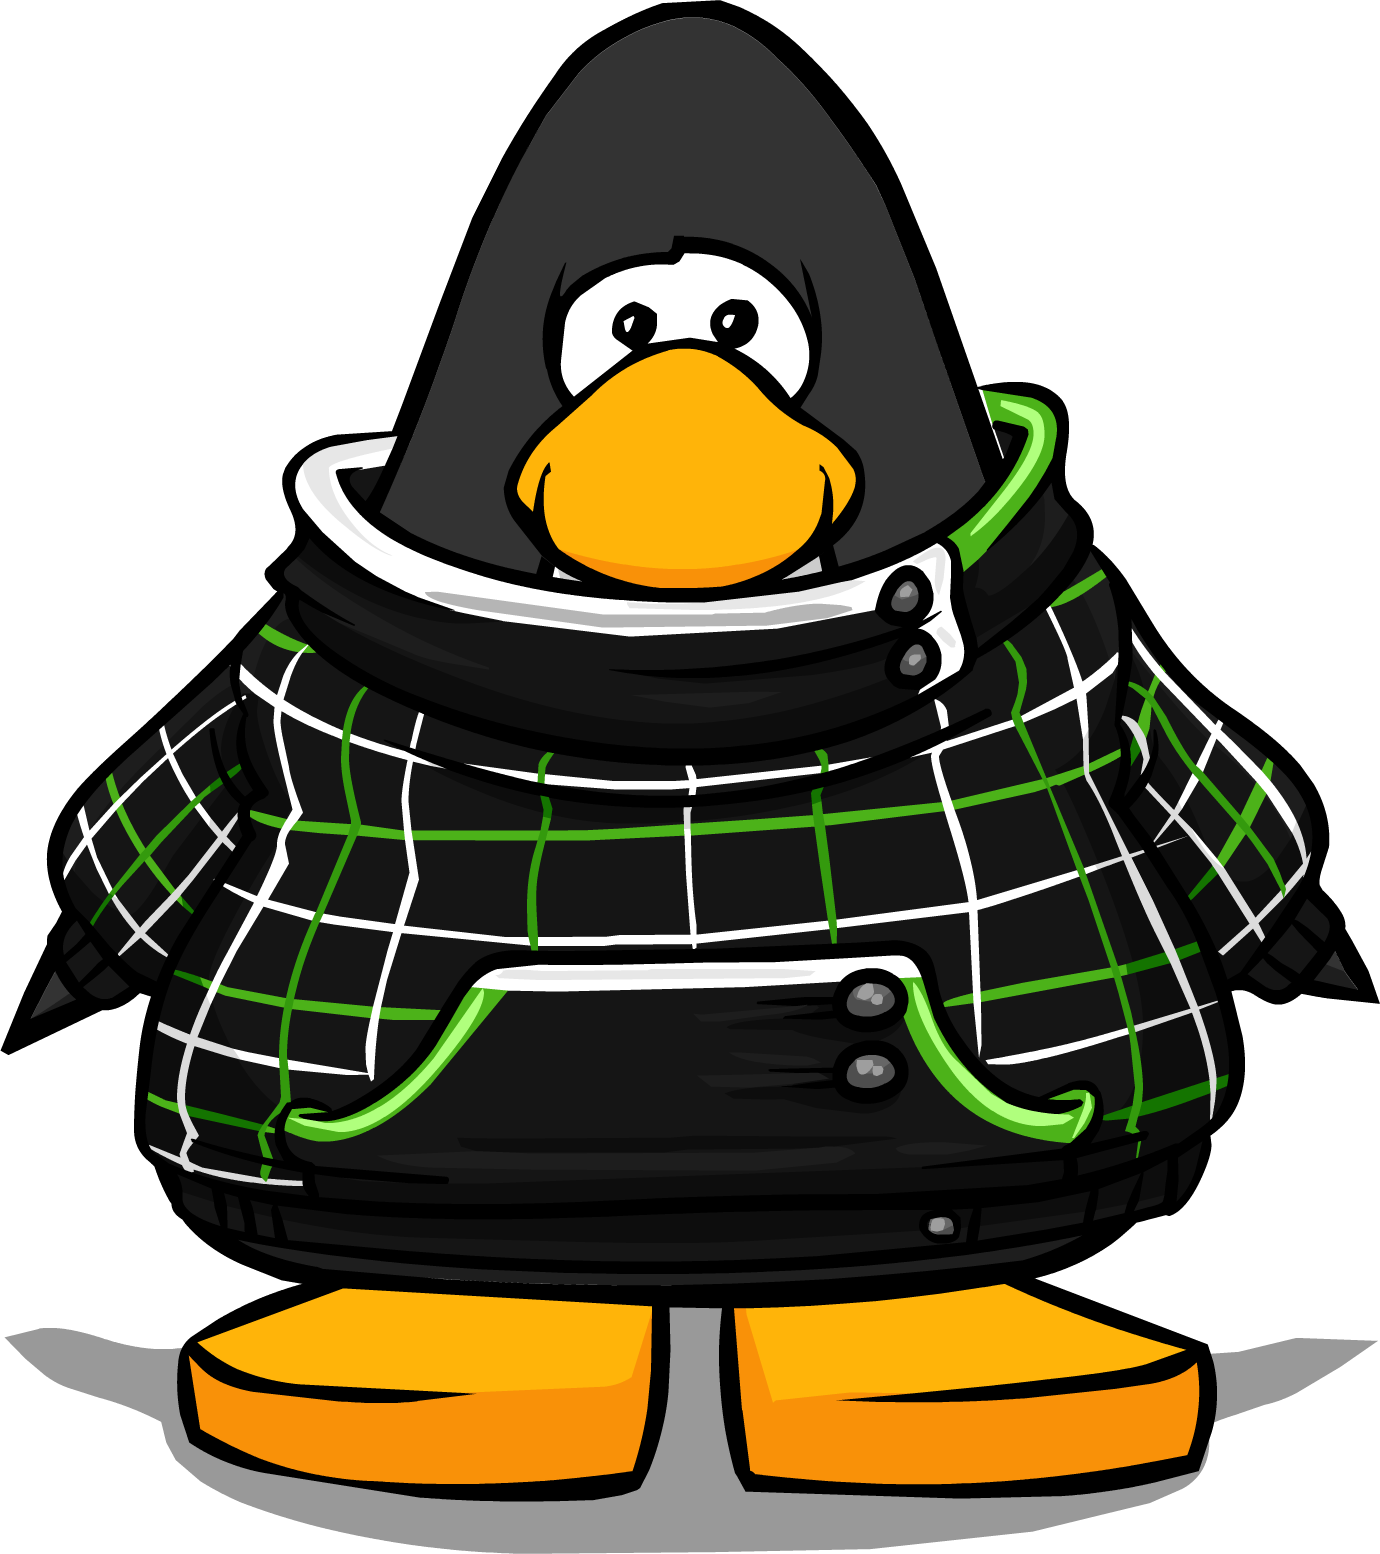 Green Grid Hoodie On A Player Card - Club Penguin Penguin Band Hoodie (1380x1554)